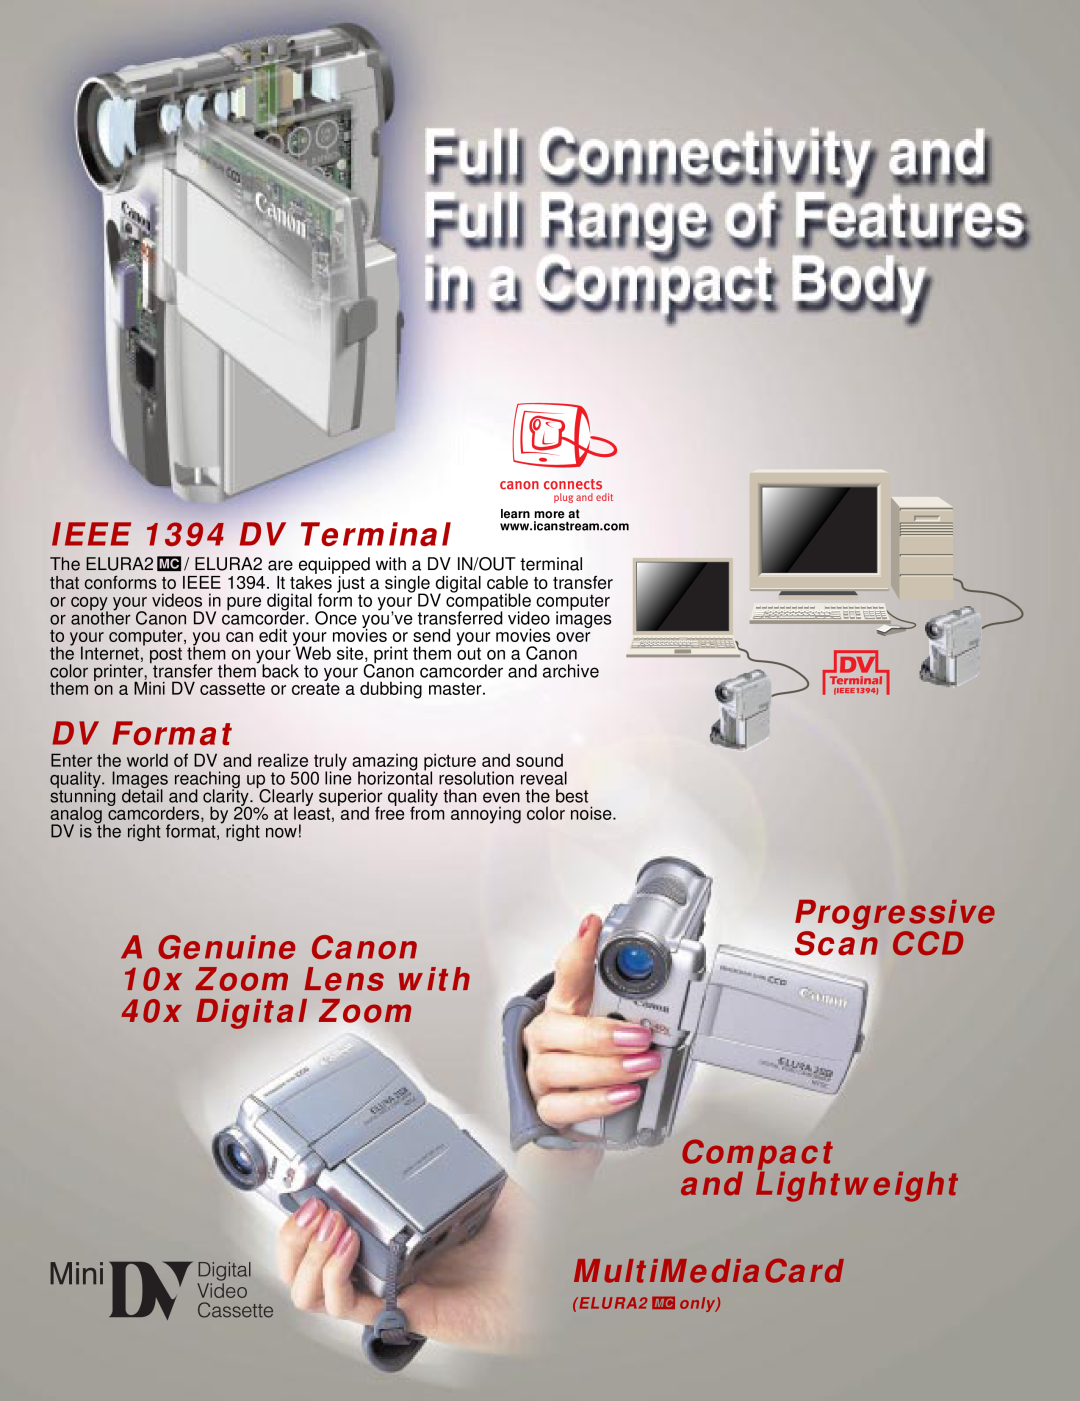 Canon 2MC manual IEEE 1394 DV Terminal, DV Format, A Genuine Canon 10x Zoom Lens with 40x Digital Zoom, ELURA2 MC only 